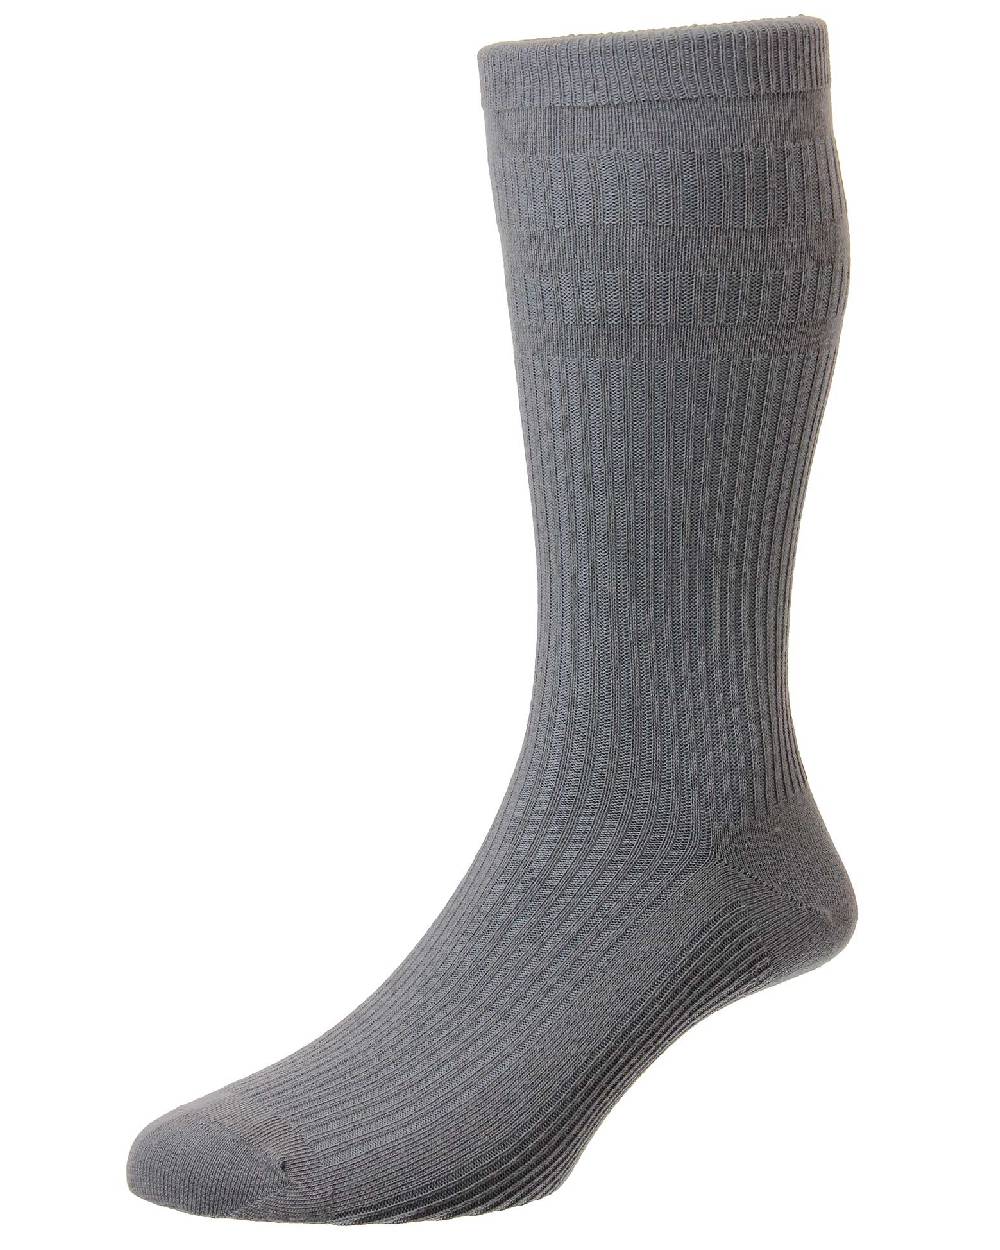 HJ Hall Cotton Extra Wide Softop Socks in Grey 